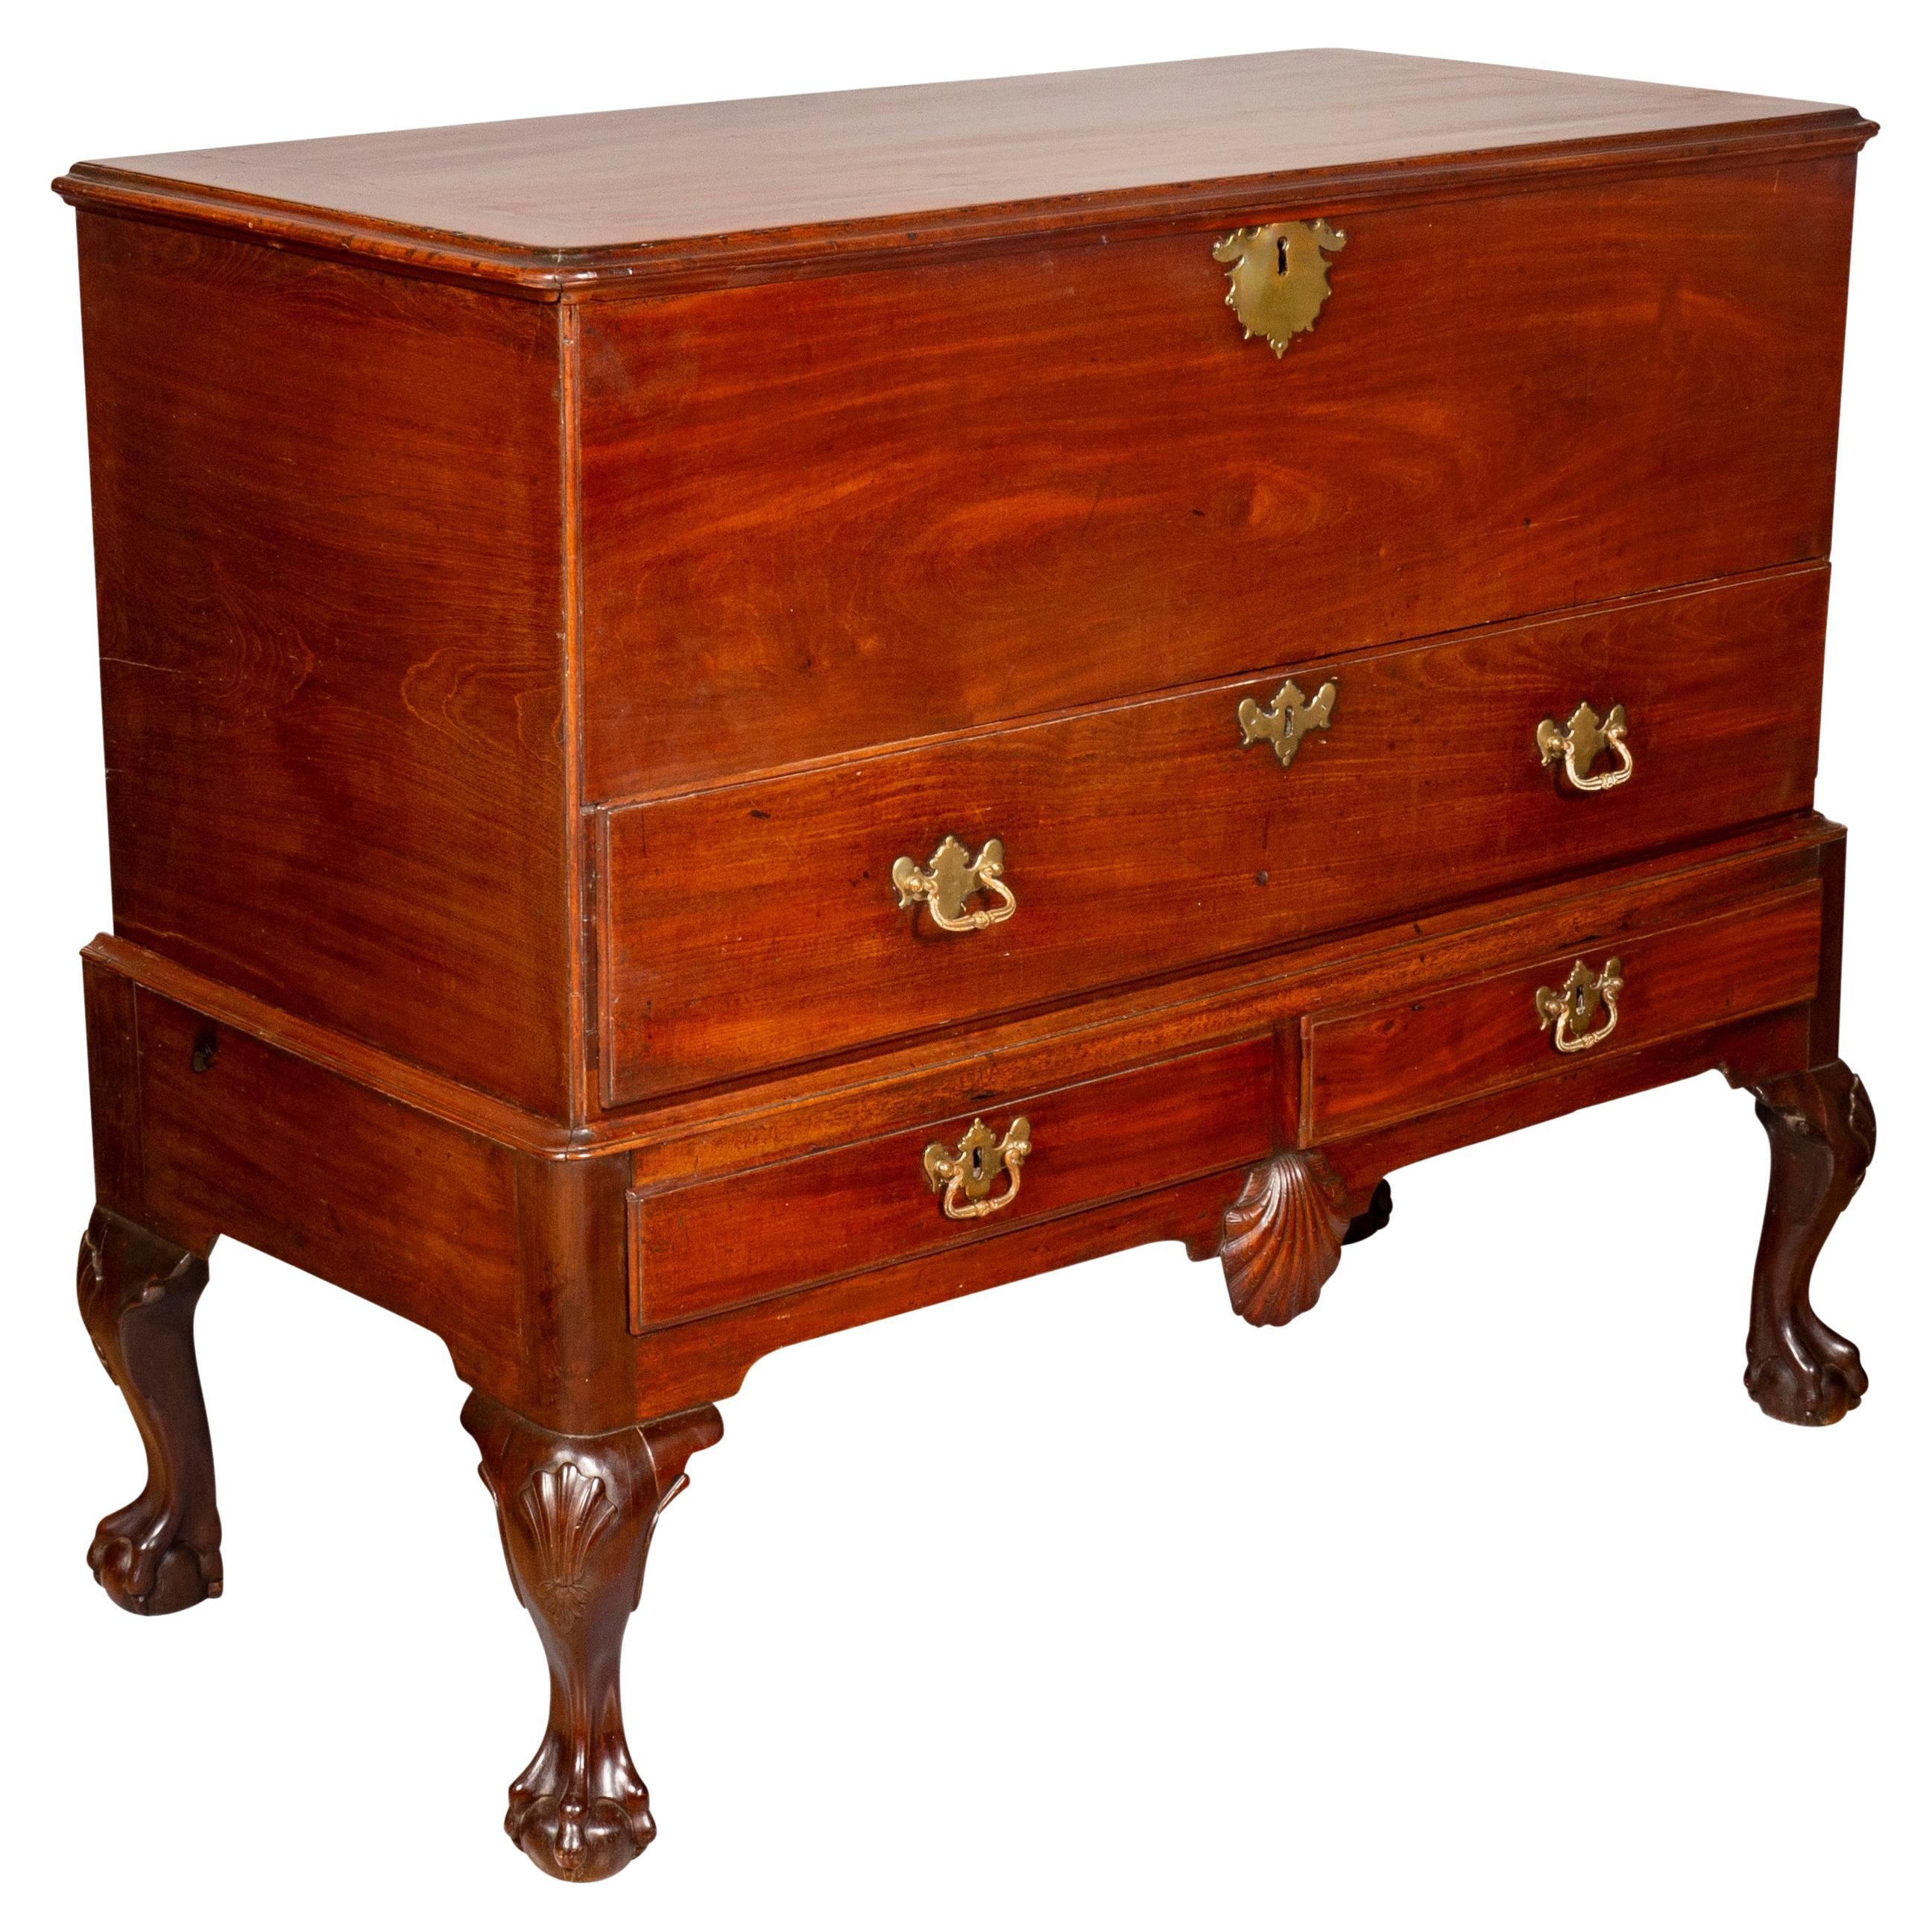 With a rectangular hinged top with molded edge over a conforming case with deep well over a long drawer. The base with two drawers over a central carved scallop shell , raised on cabriole legs with shell knees and ball and claw feet. With brass